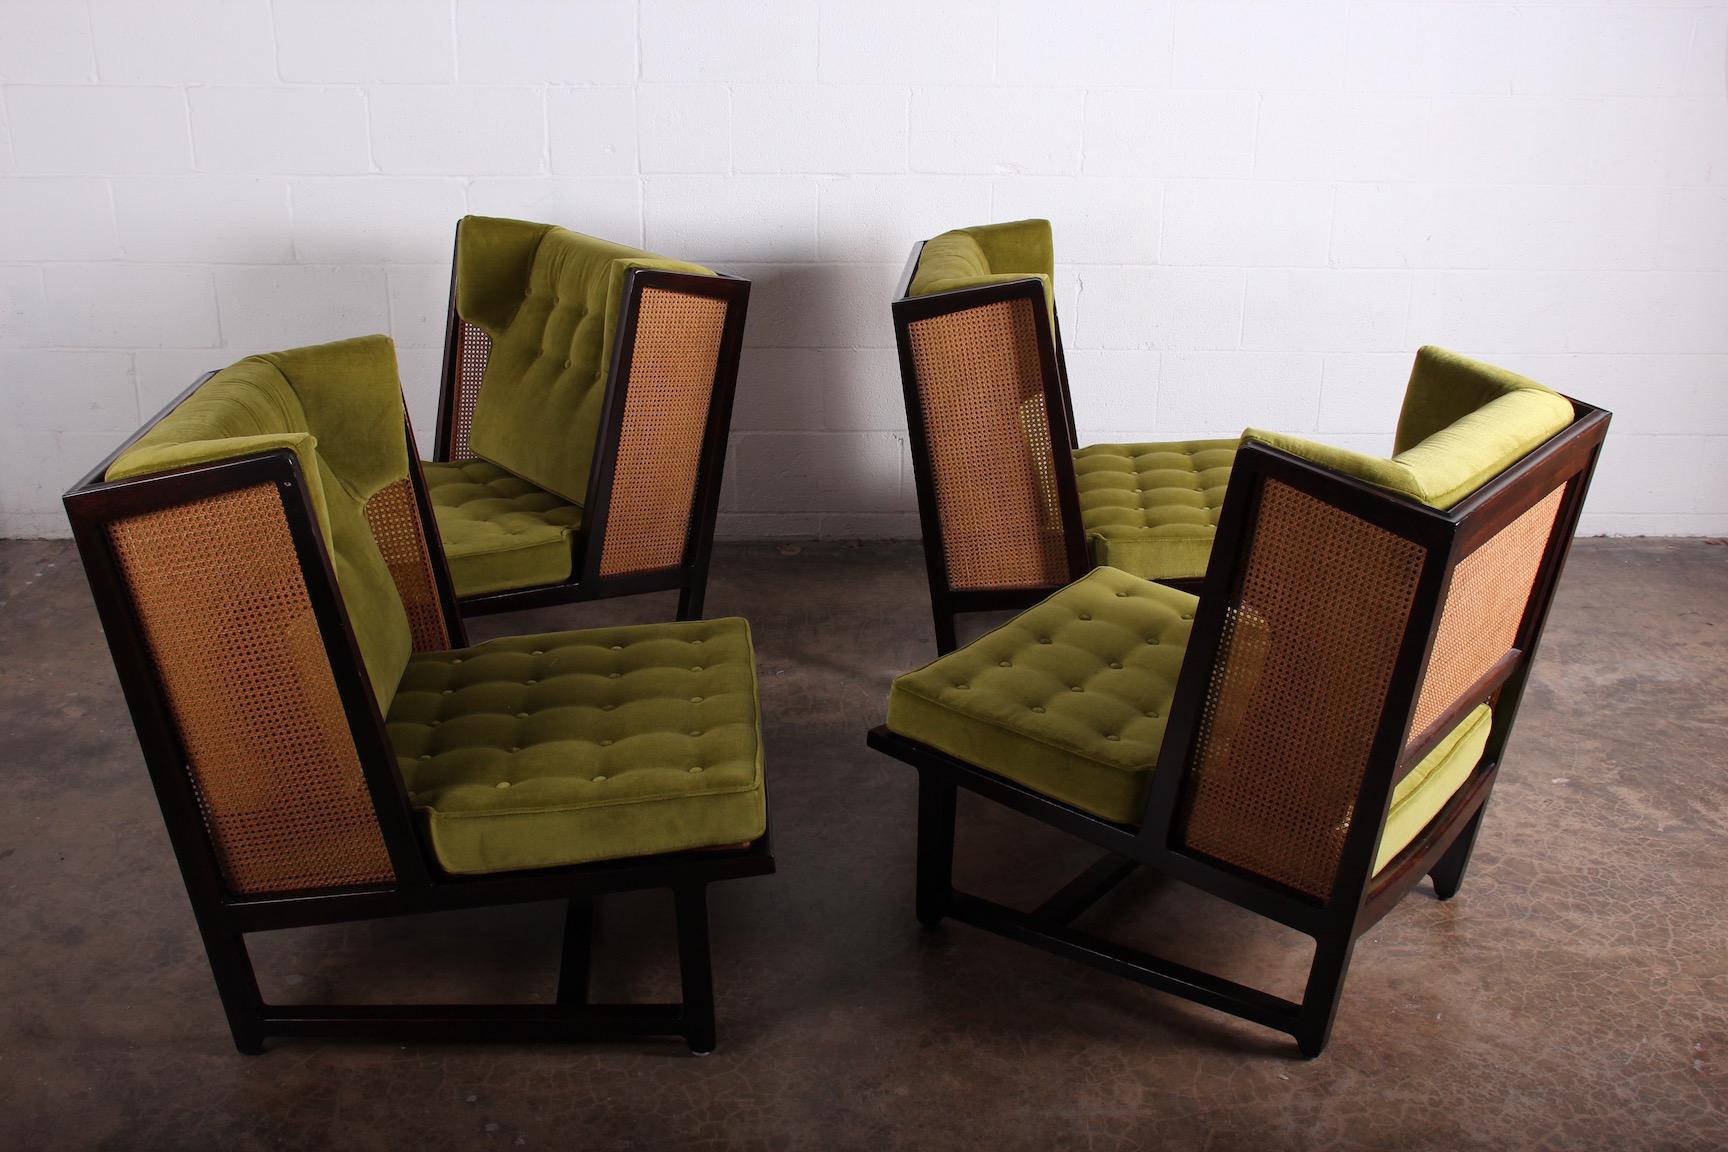 A rare pair of cane back wing chairs model 6016 designed by Edward Wormley for Dunbar, 1960. Original finish and reupholstered in green velvet. We have two pairs available.